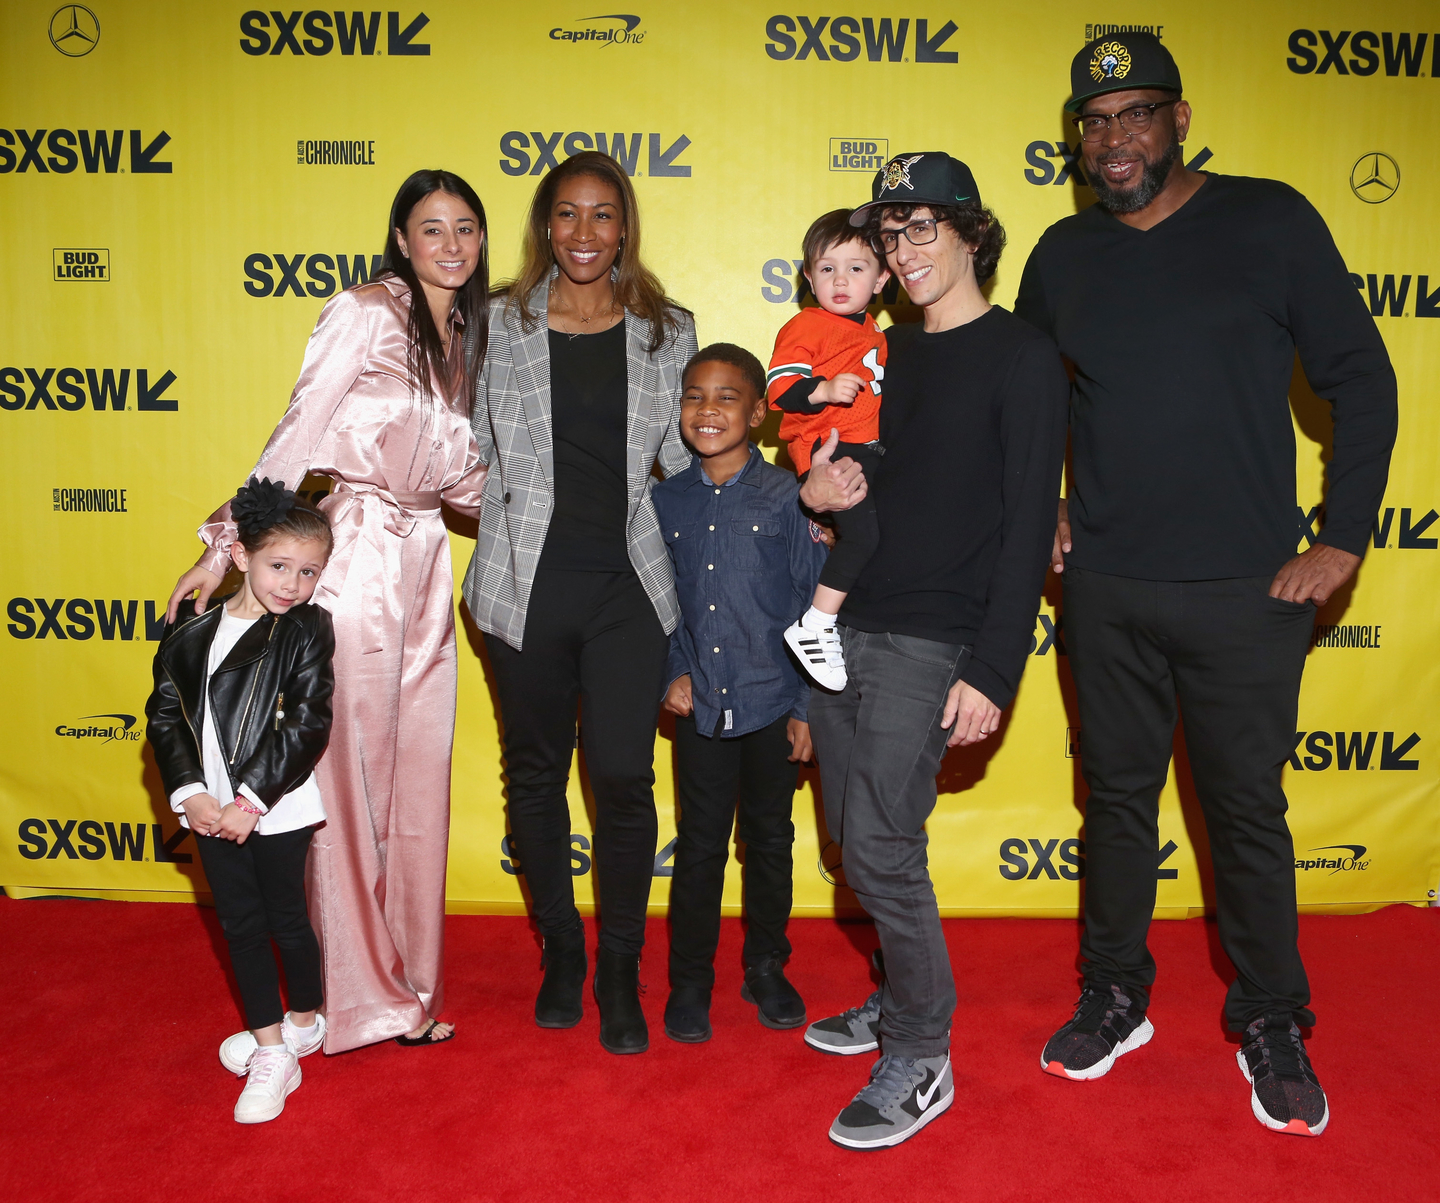 Director Evan Rosenfeld, Luther Campbell and their families attended the world premiere of the Episodic Warriors of Liberty City. Photo by Travis P Ball/Getty Images for SXSW